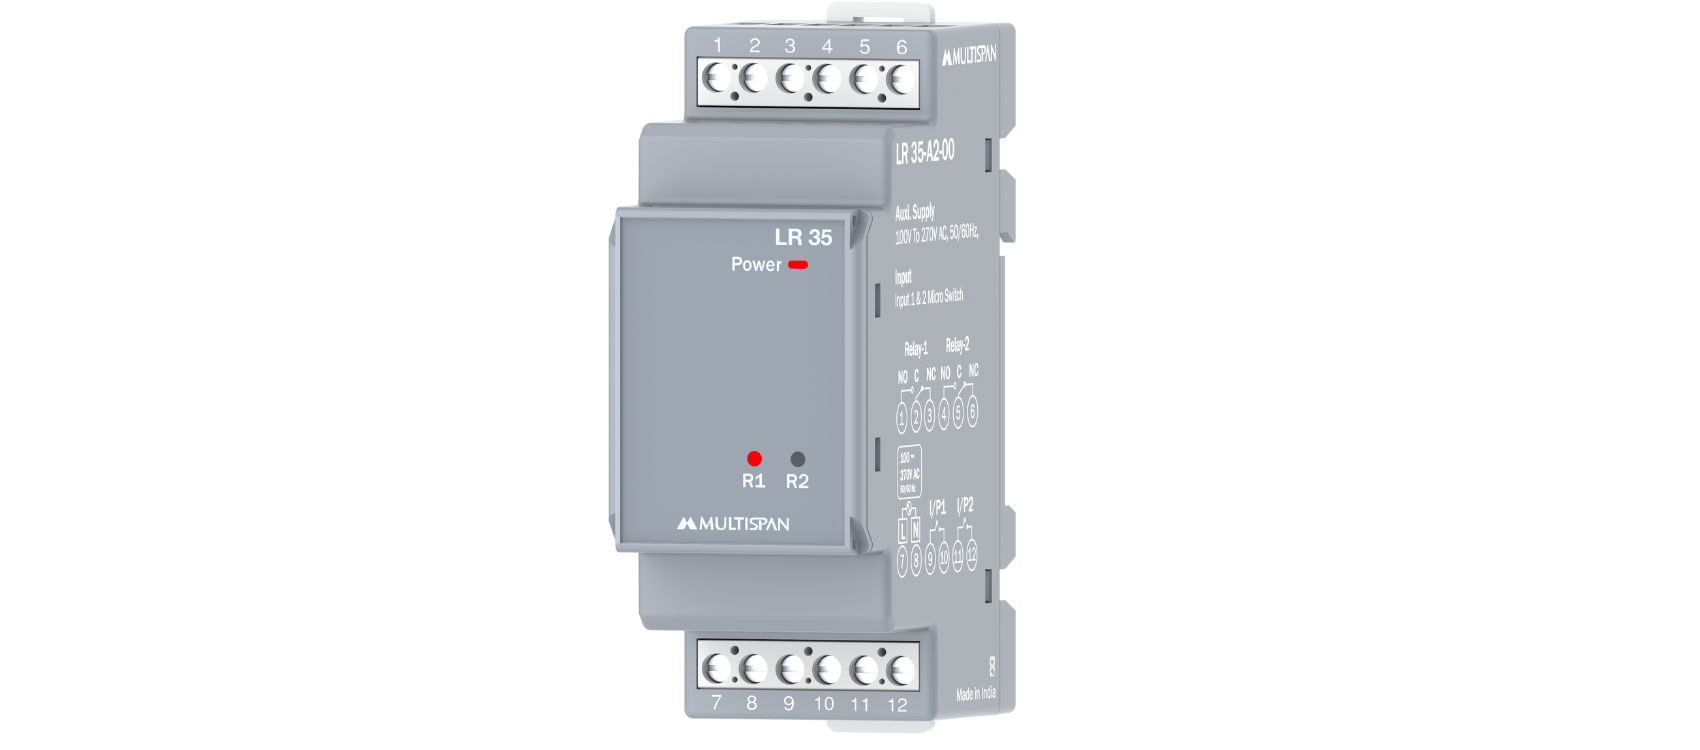 LR-35 Two Load Sharing Relay - product image